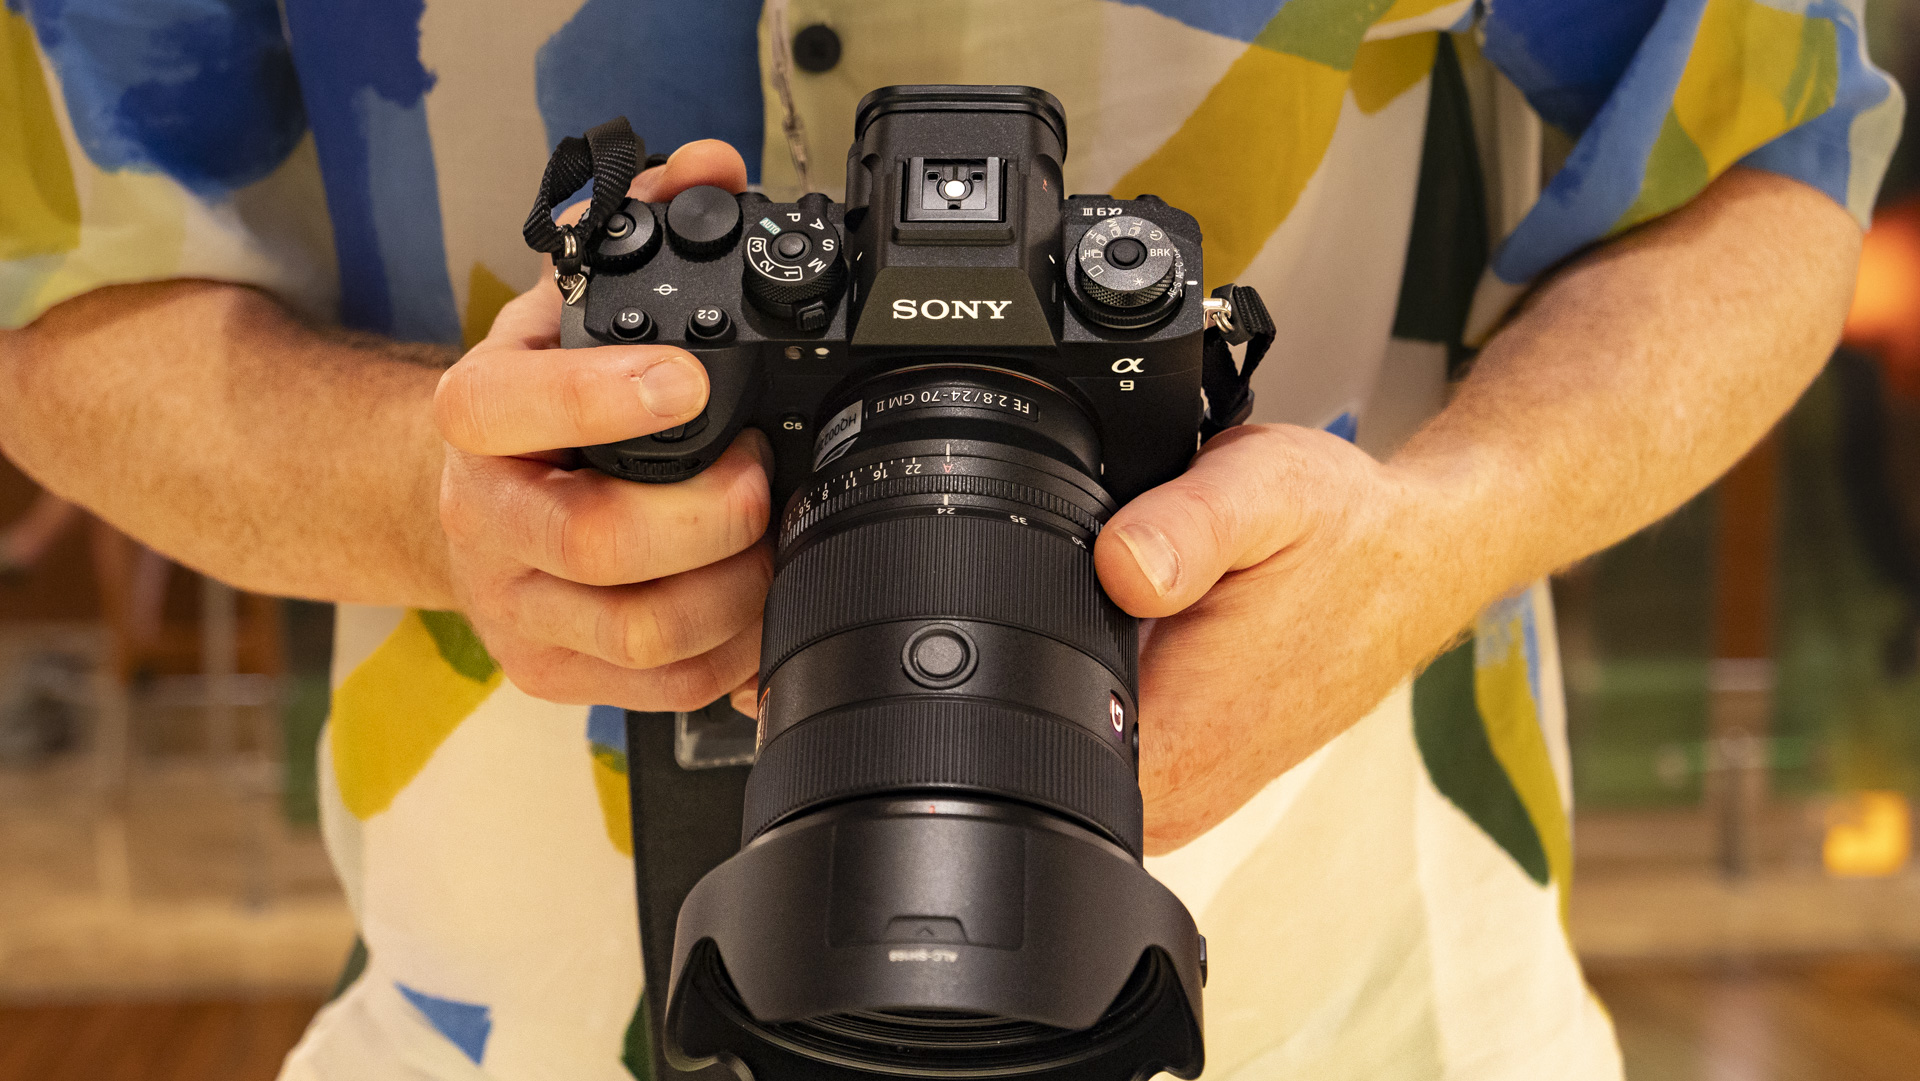 Sony A9 III in the hand with lens attached